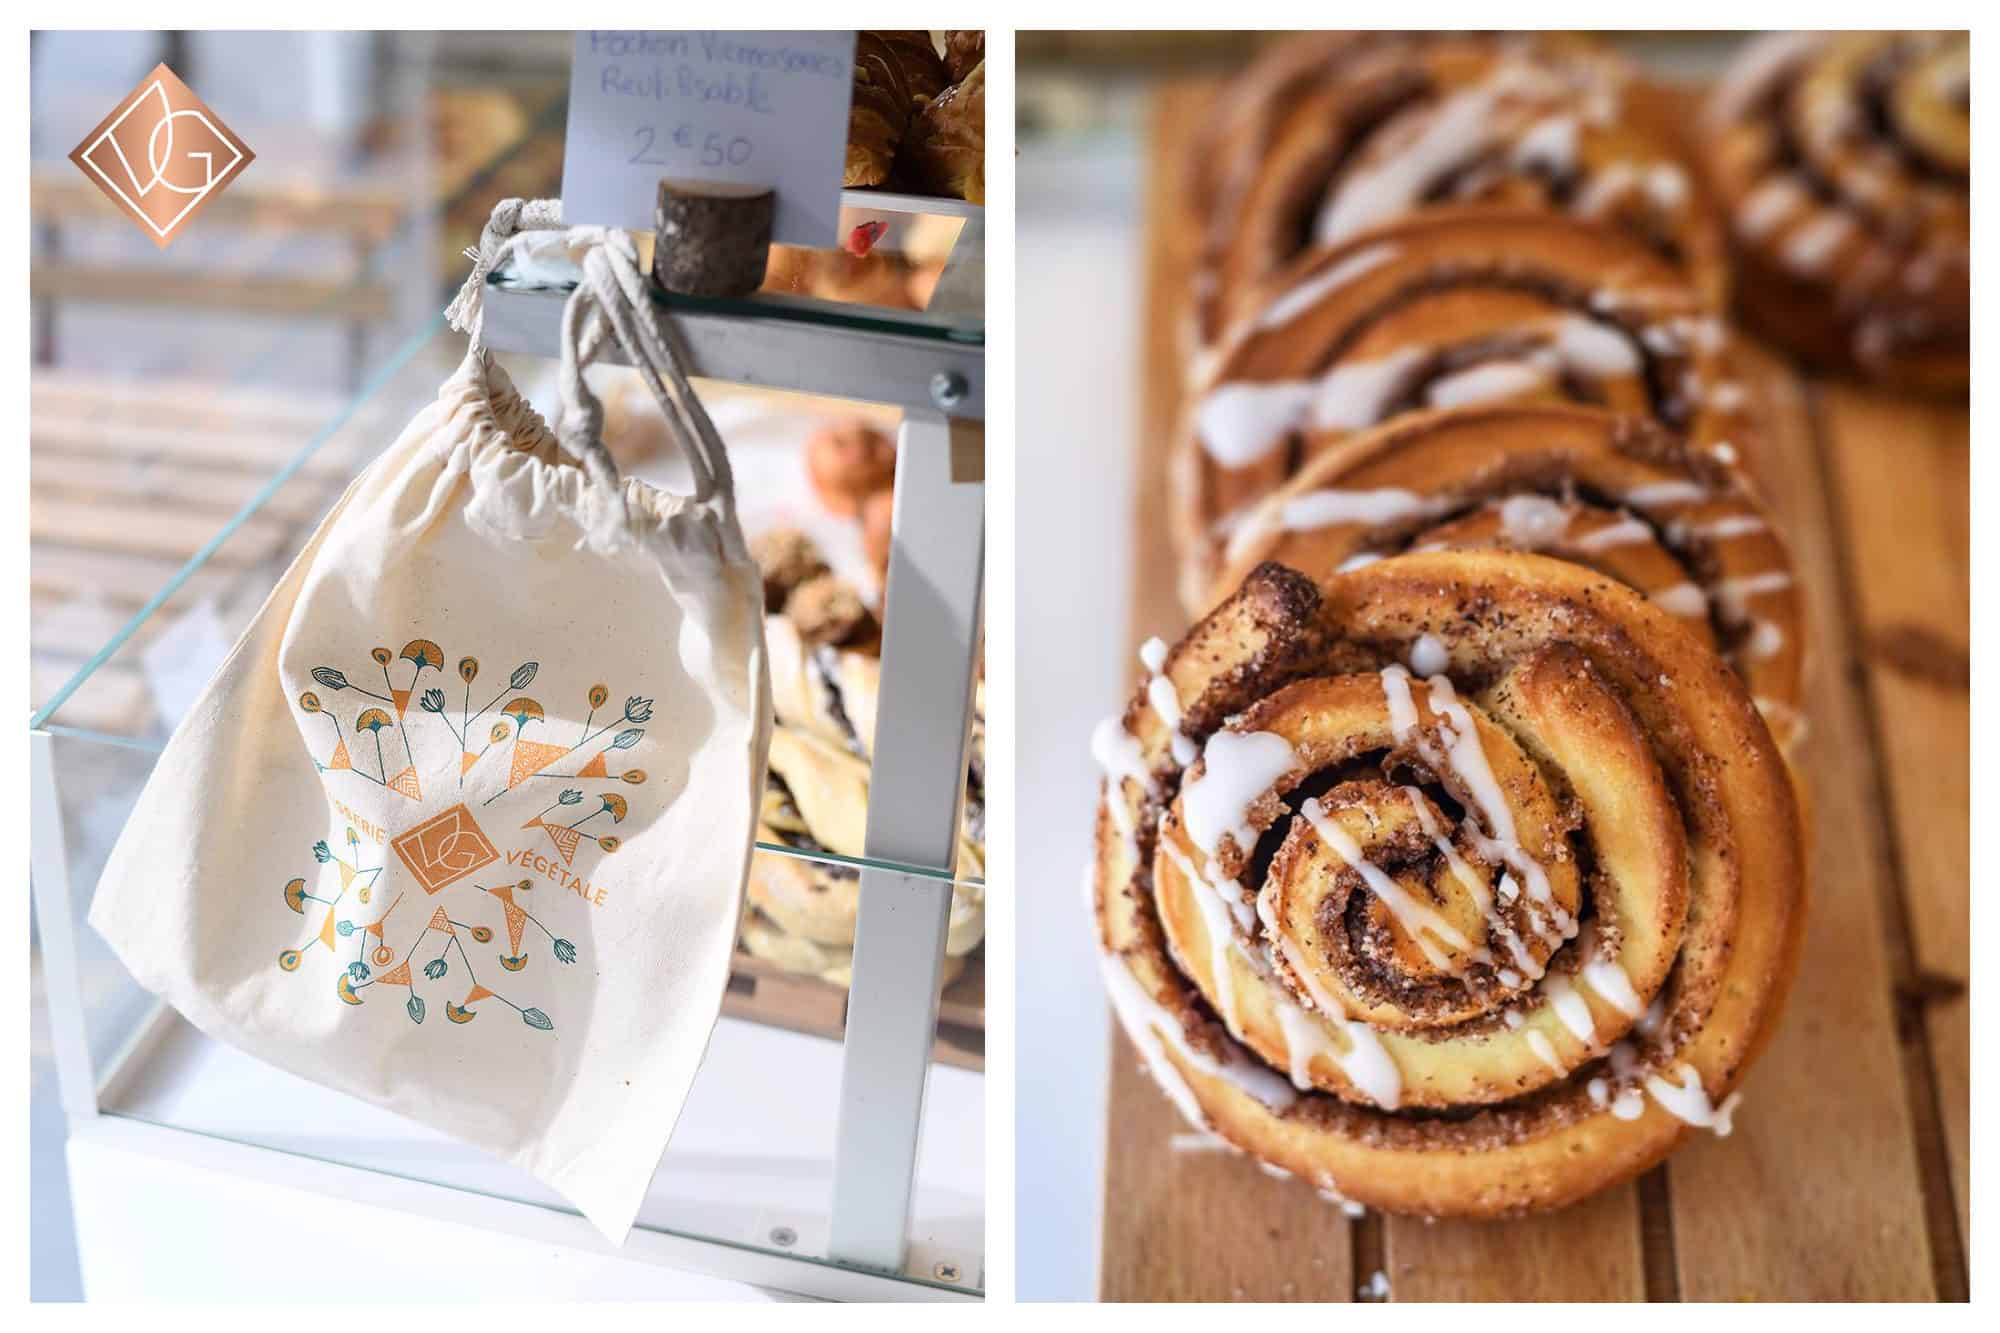 VG patisserie, a gluten-free bakery in Paris, gives out fabric bread bags (left) and offers delicious gluten-free cinnamon swirls (right). 